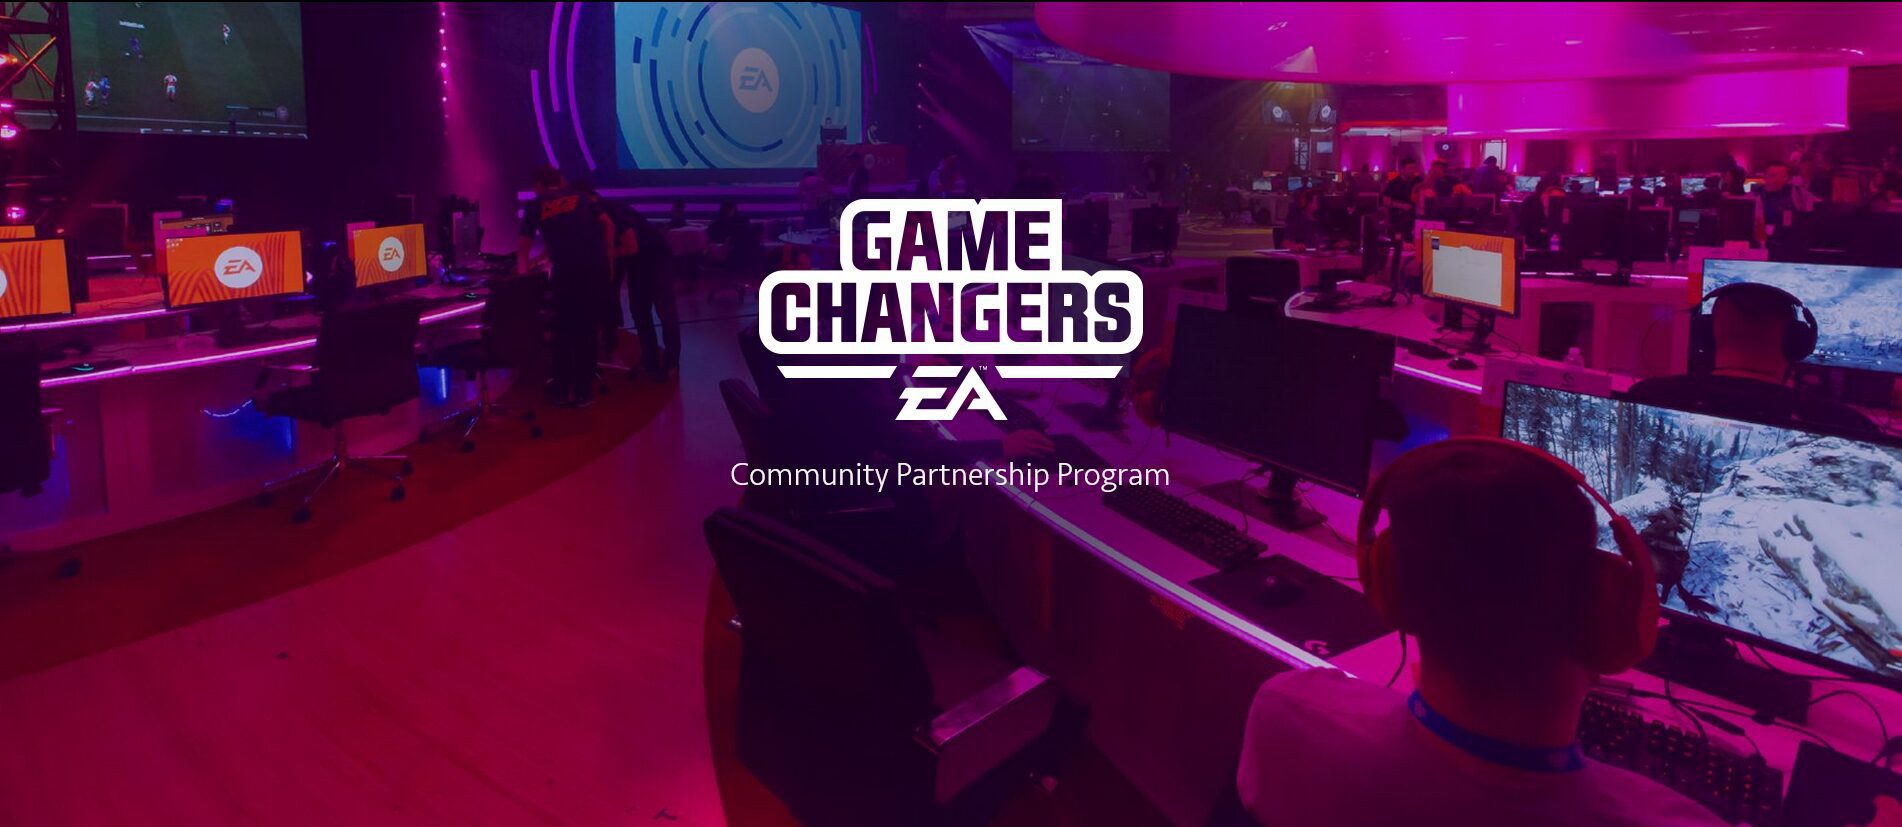 EA Has Game Changer Remove Video, Reupload  Without Watermarks